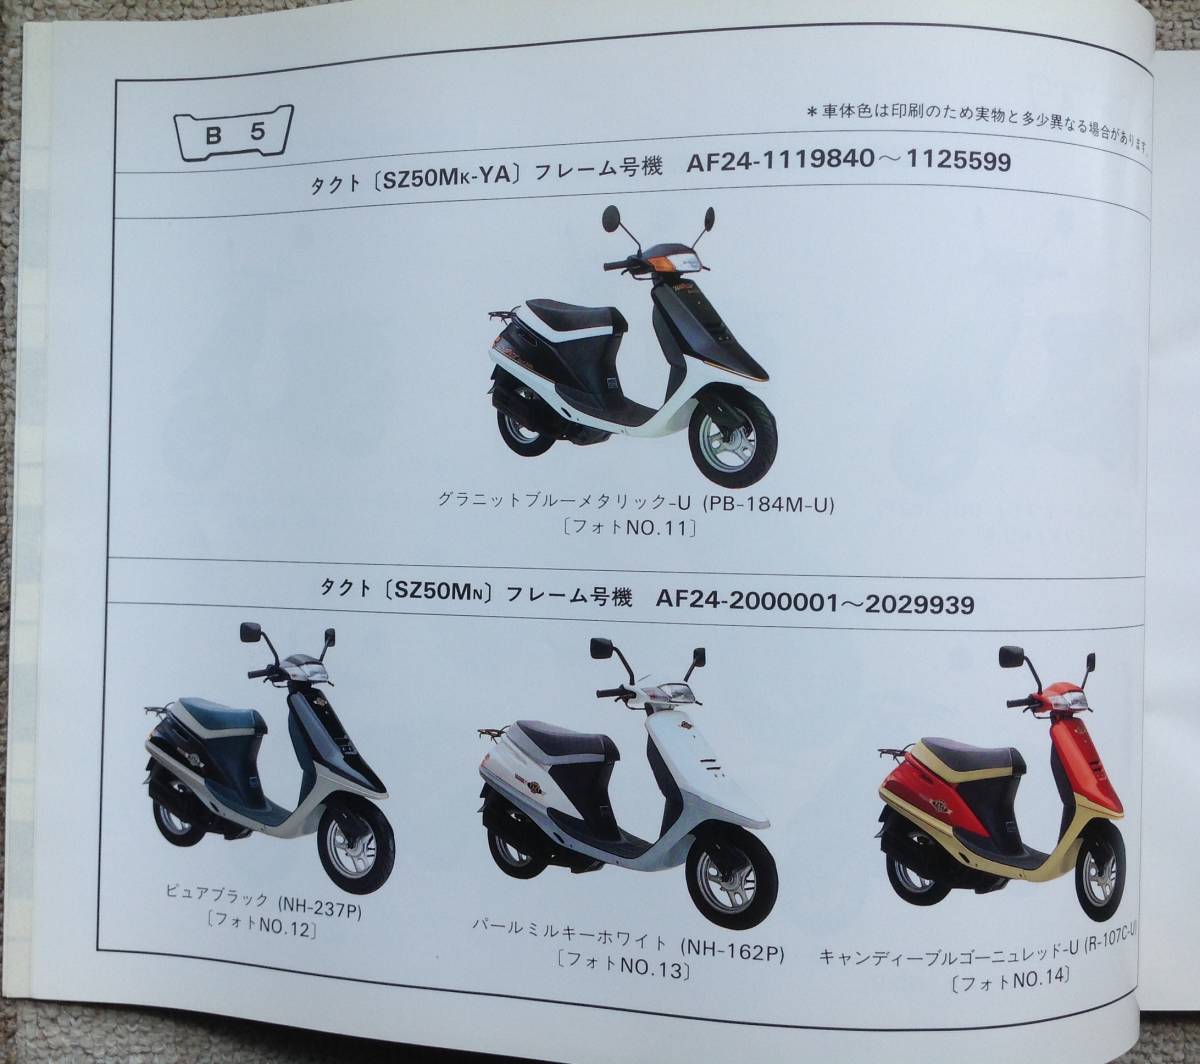  Honda tact, tact *S, tact * Stand Up. parts list 8 version Heisei era 8 year 2 month issue 